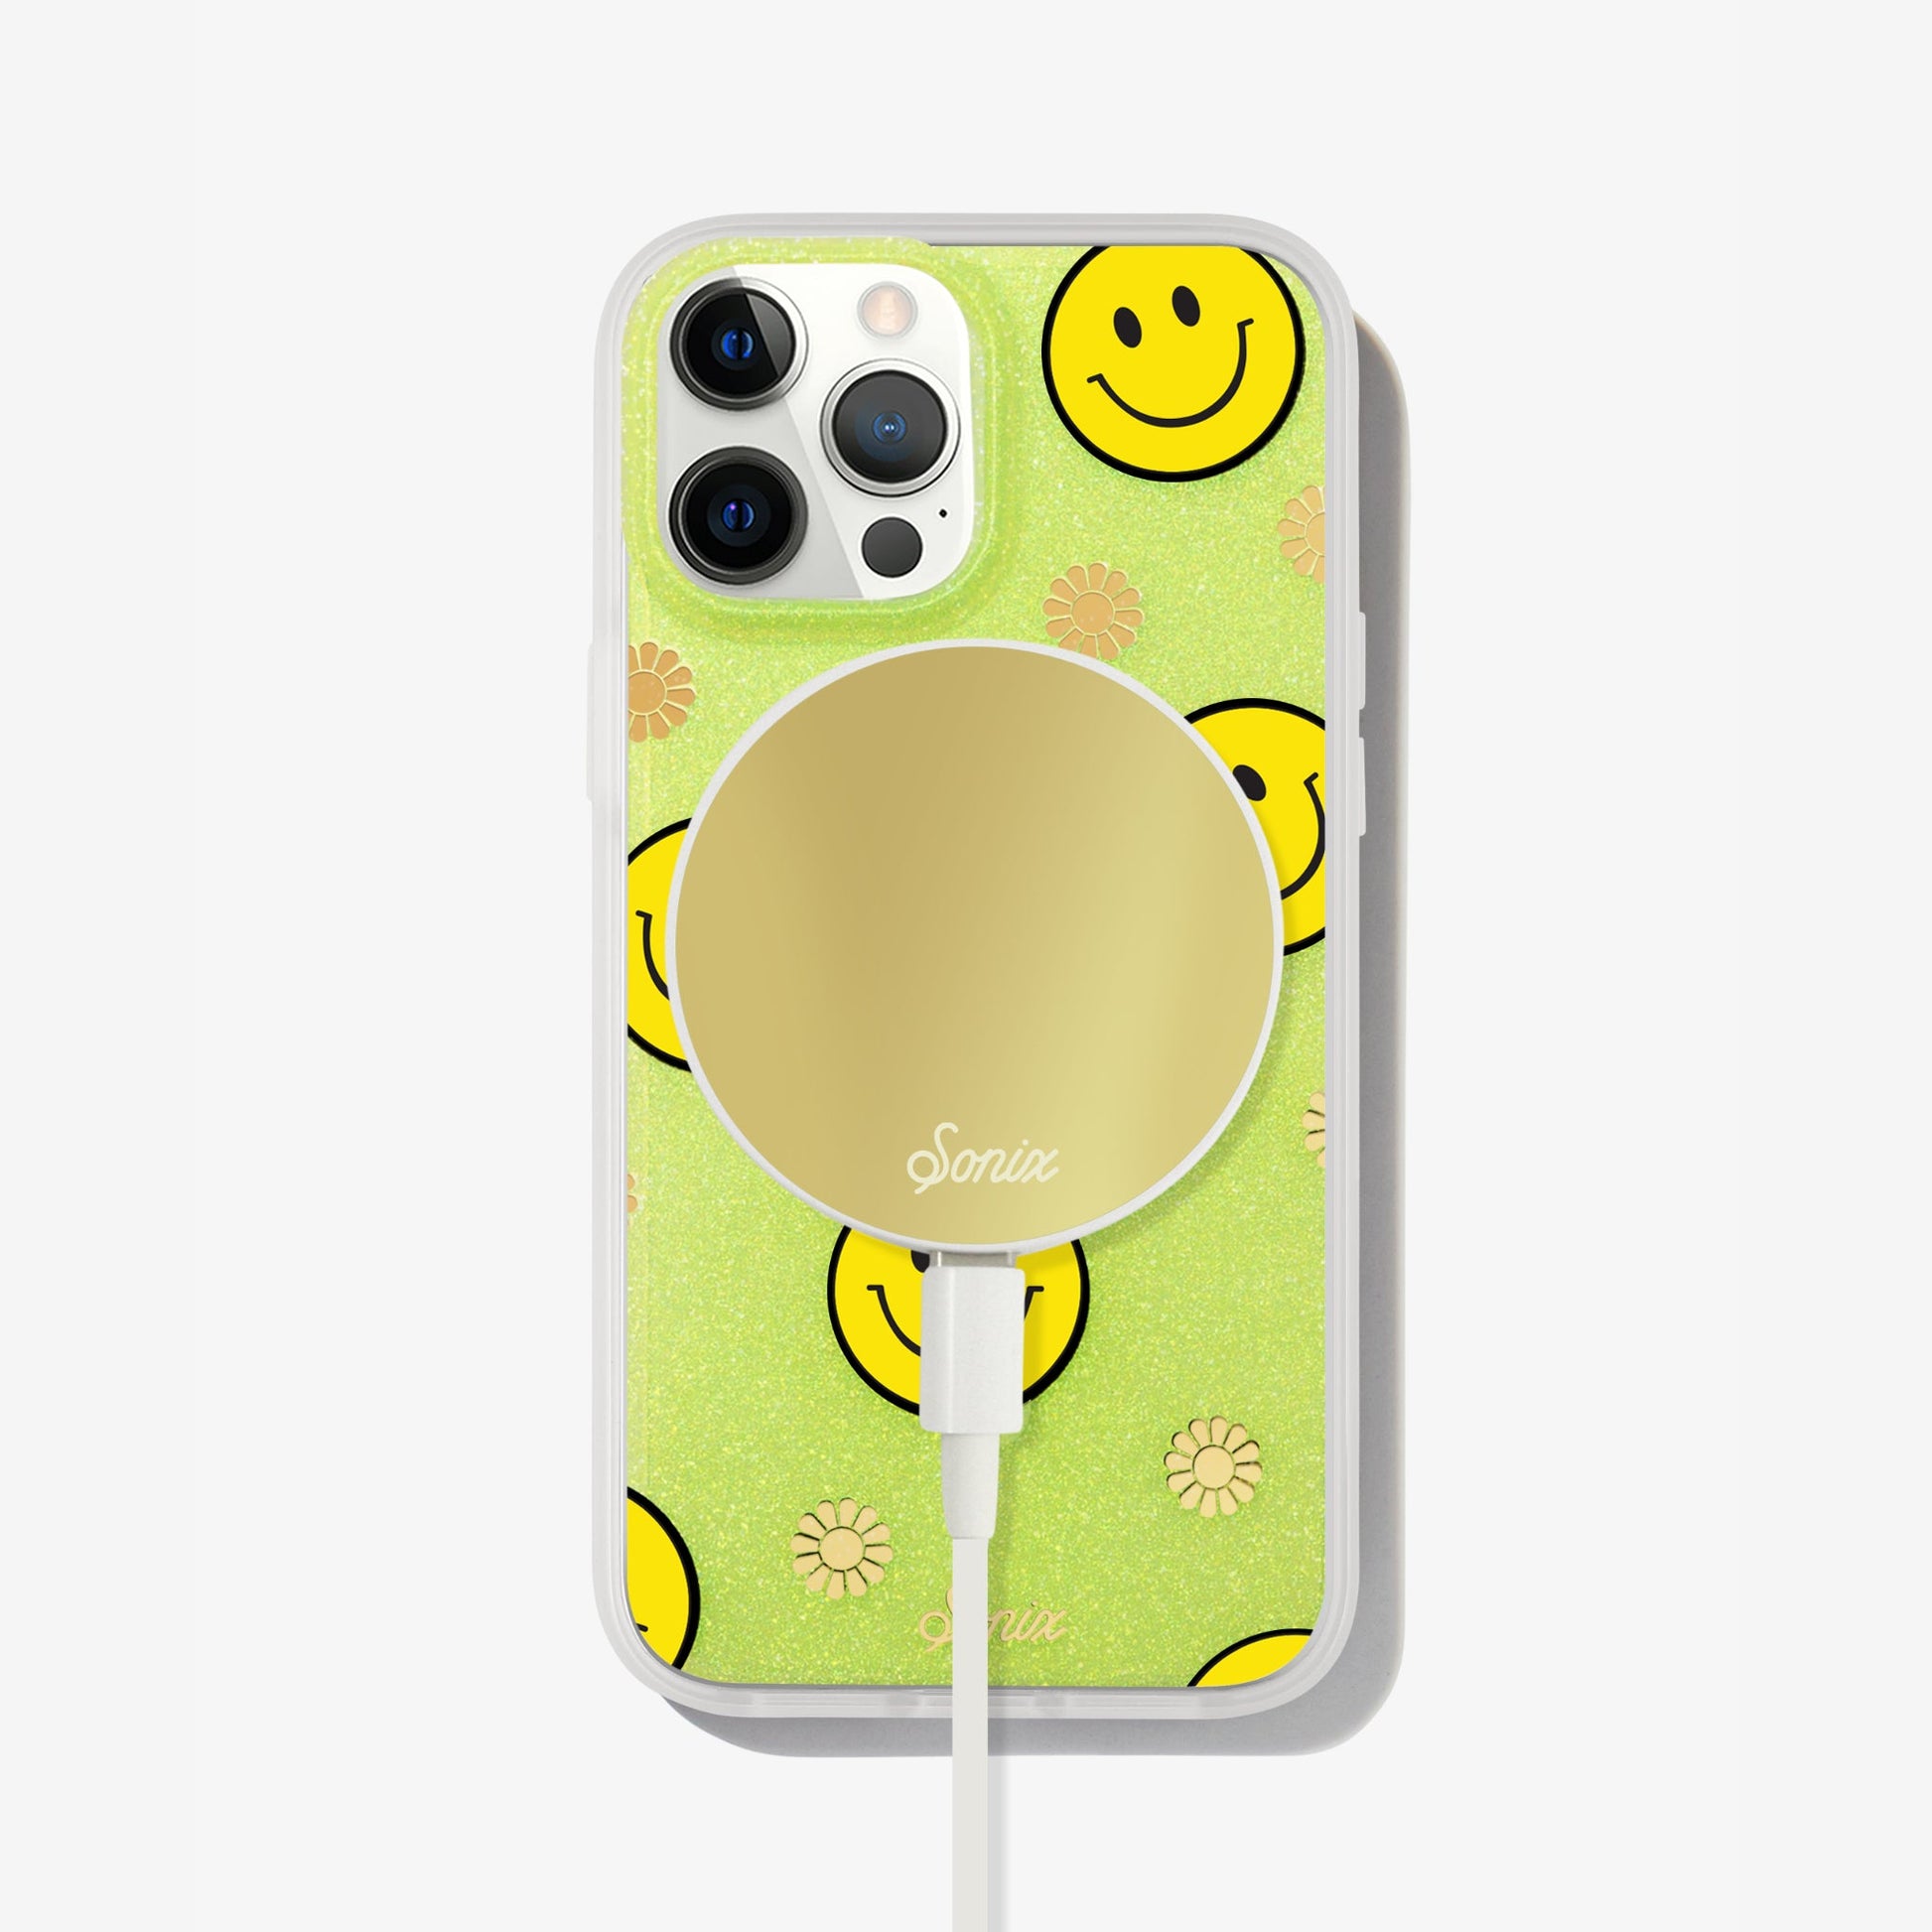 The clear yellow case infused with iridescent glitter features happy faces and signature gold foil flowers shown on an iphone with a gold maglink charger on the back